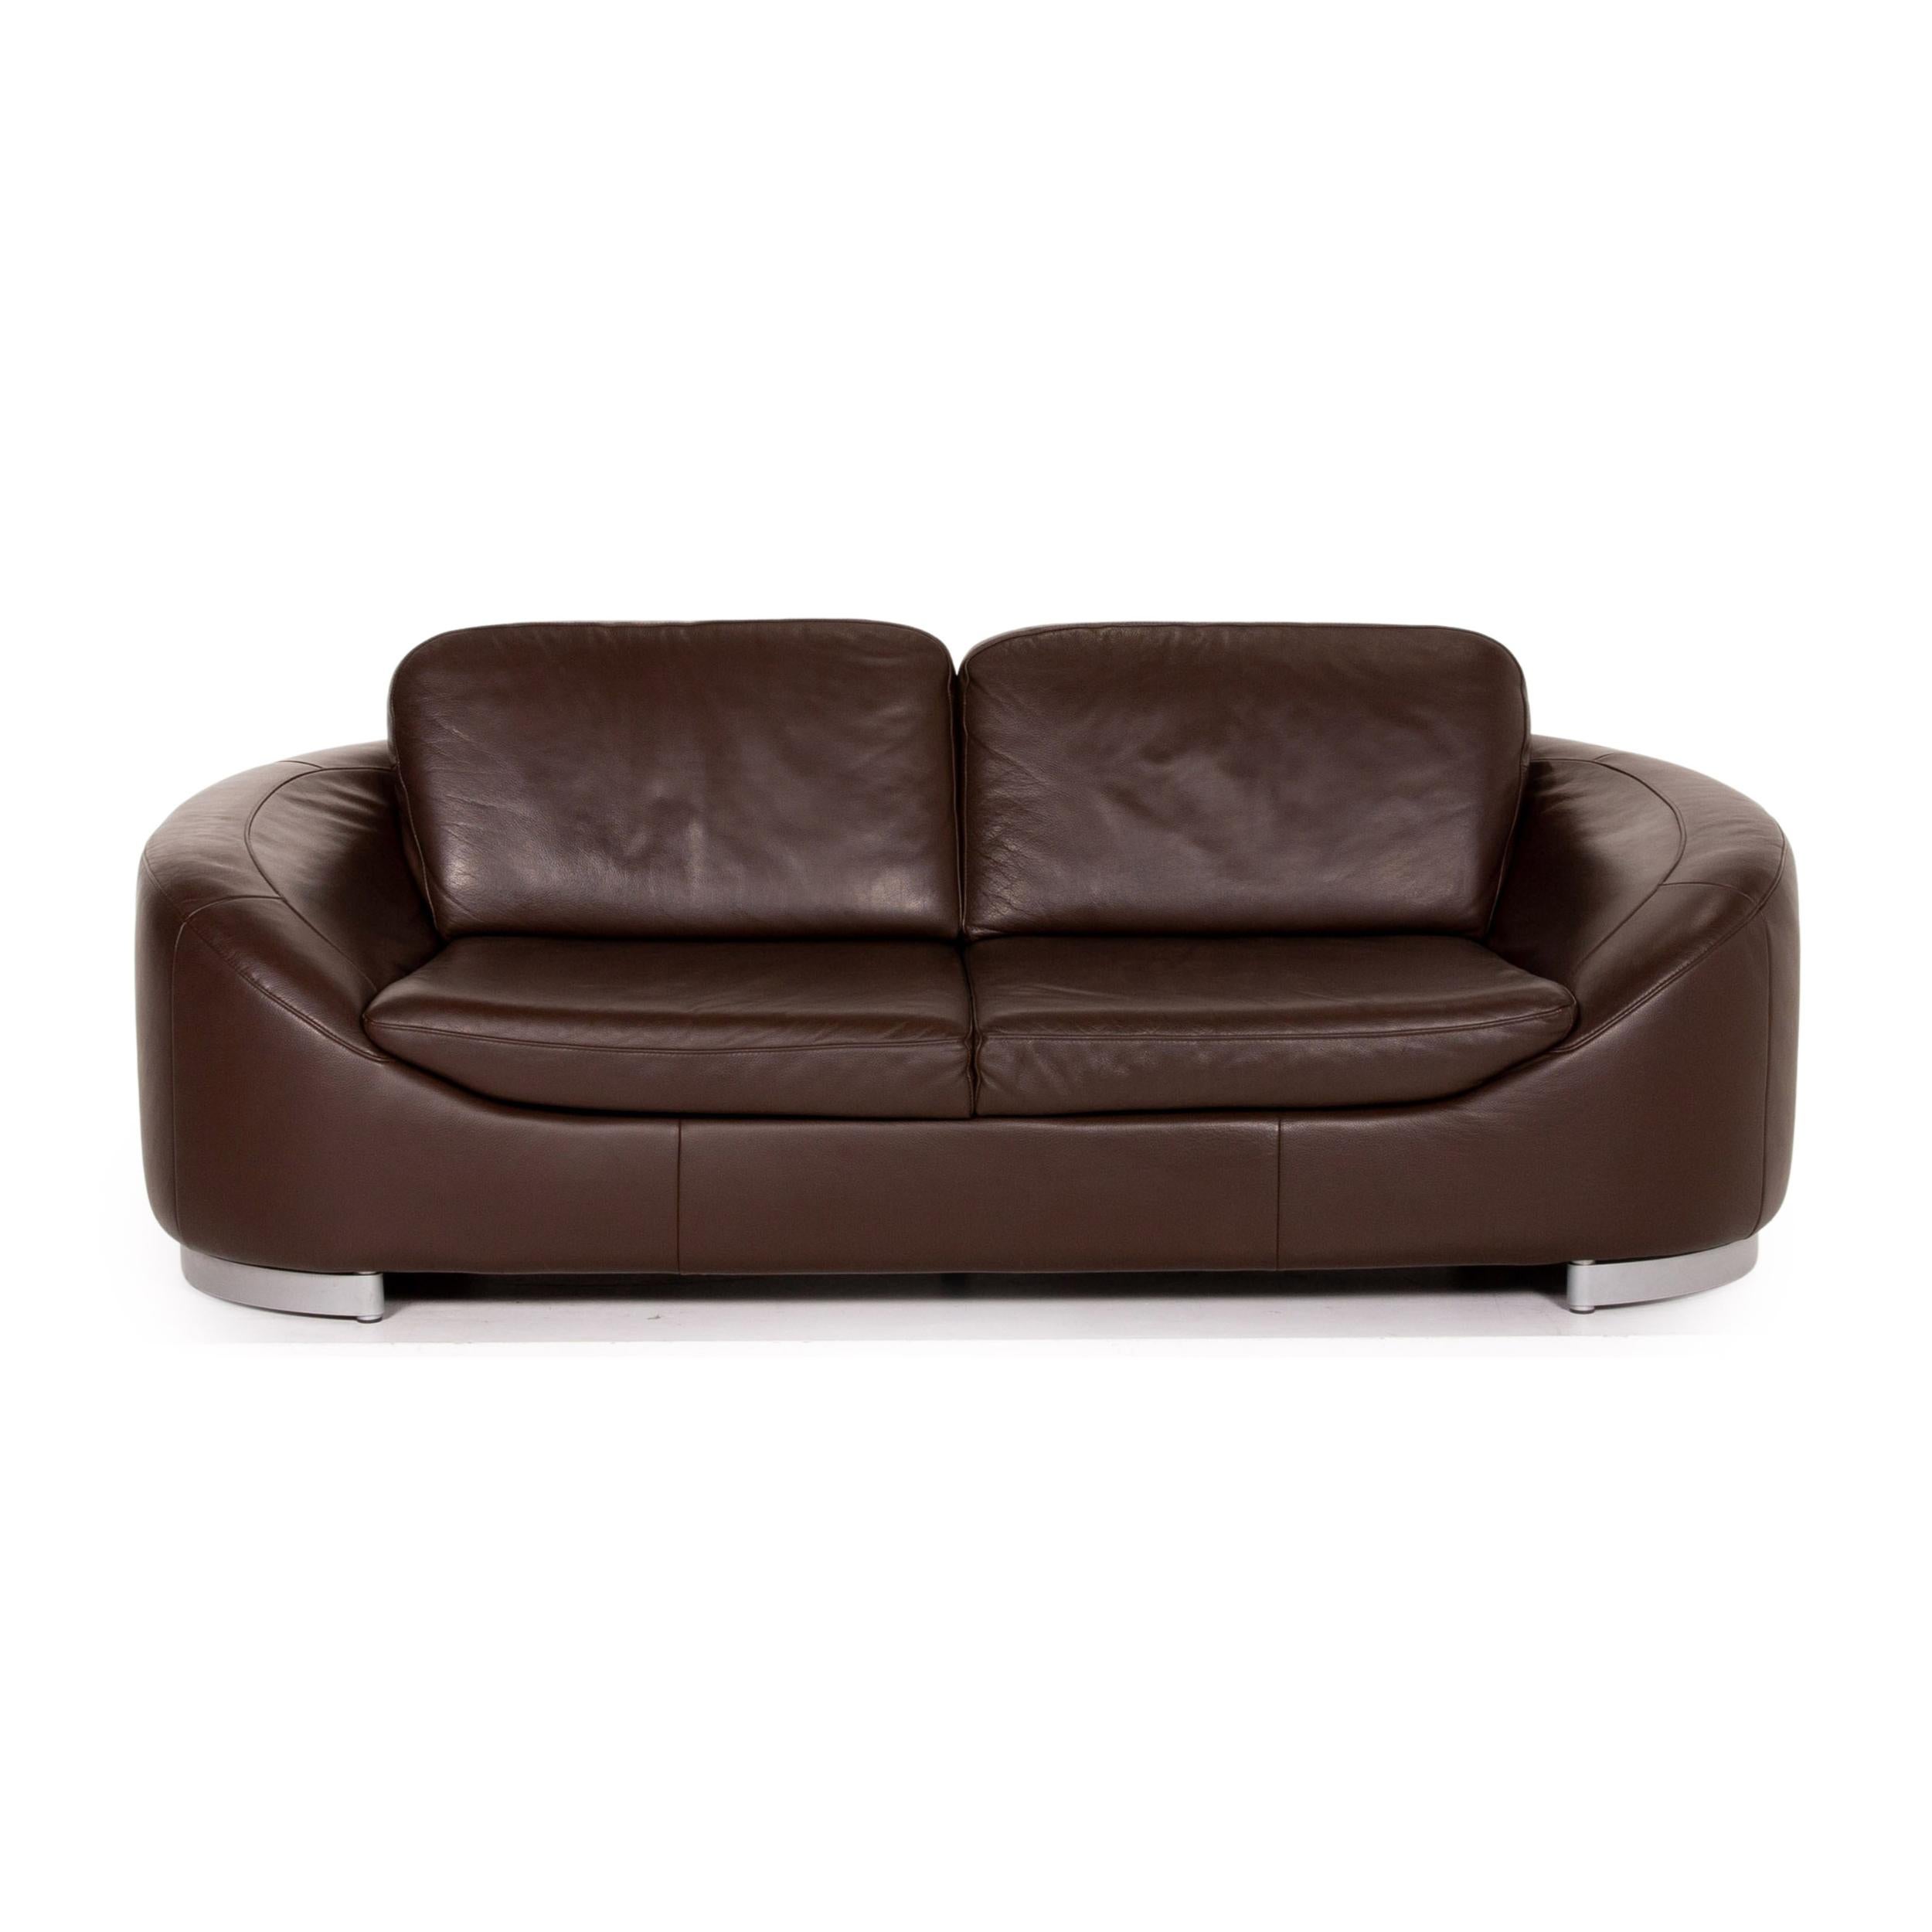 Ewald Schillig Leather Sofa Set Brown Dark Brown 2x Two-Seater In Fair Condition For Sale In Cologne, DE